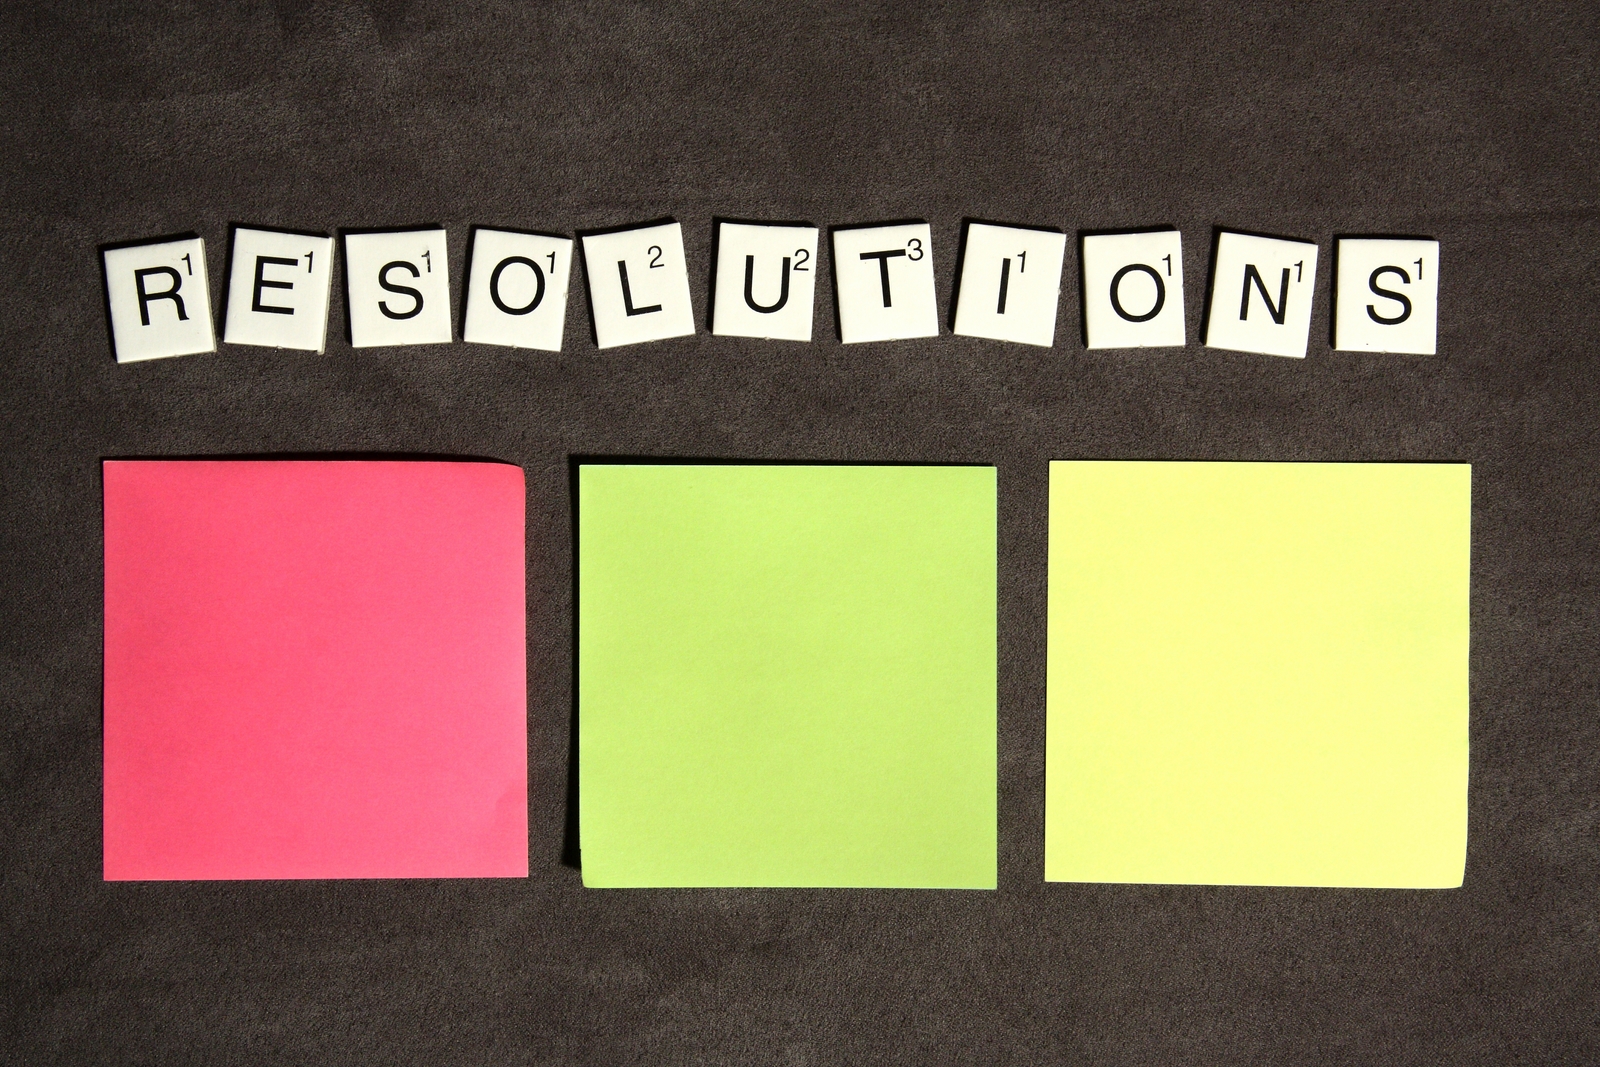 Scrabble Resolutions with Sticky Notes